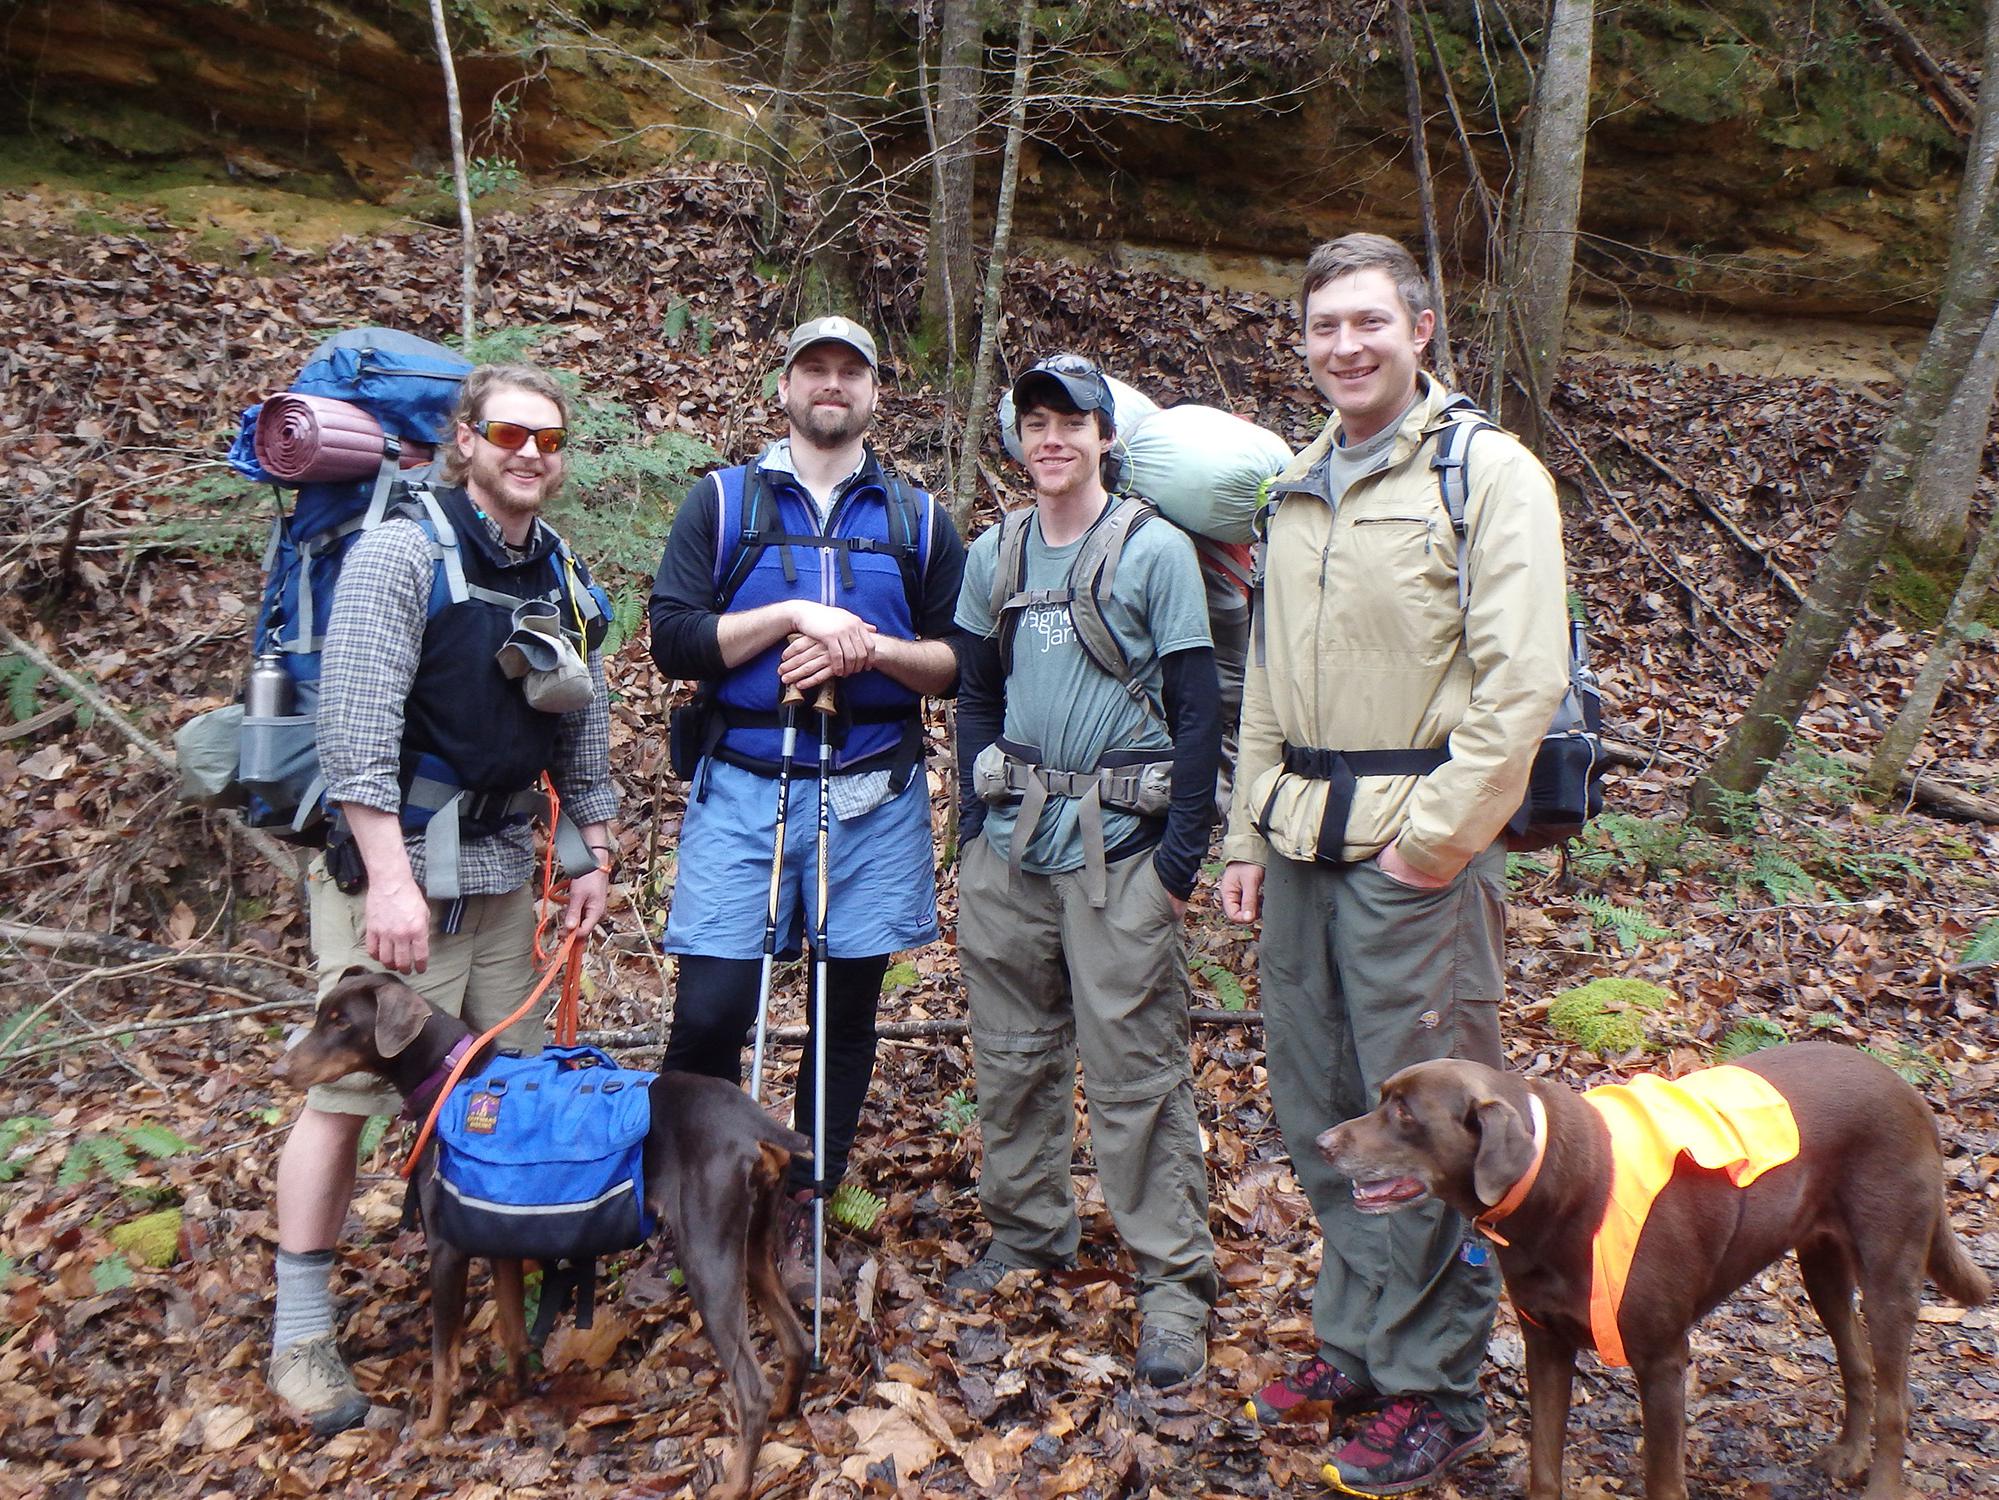 Don’t let the colder weather prevent outdoor adventures this winter. This group is staying comfortable by layering their clothing. (Photo by MSU Extension Service/Evan O’Donnell)